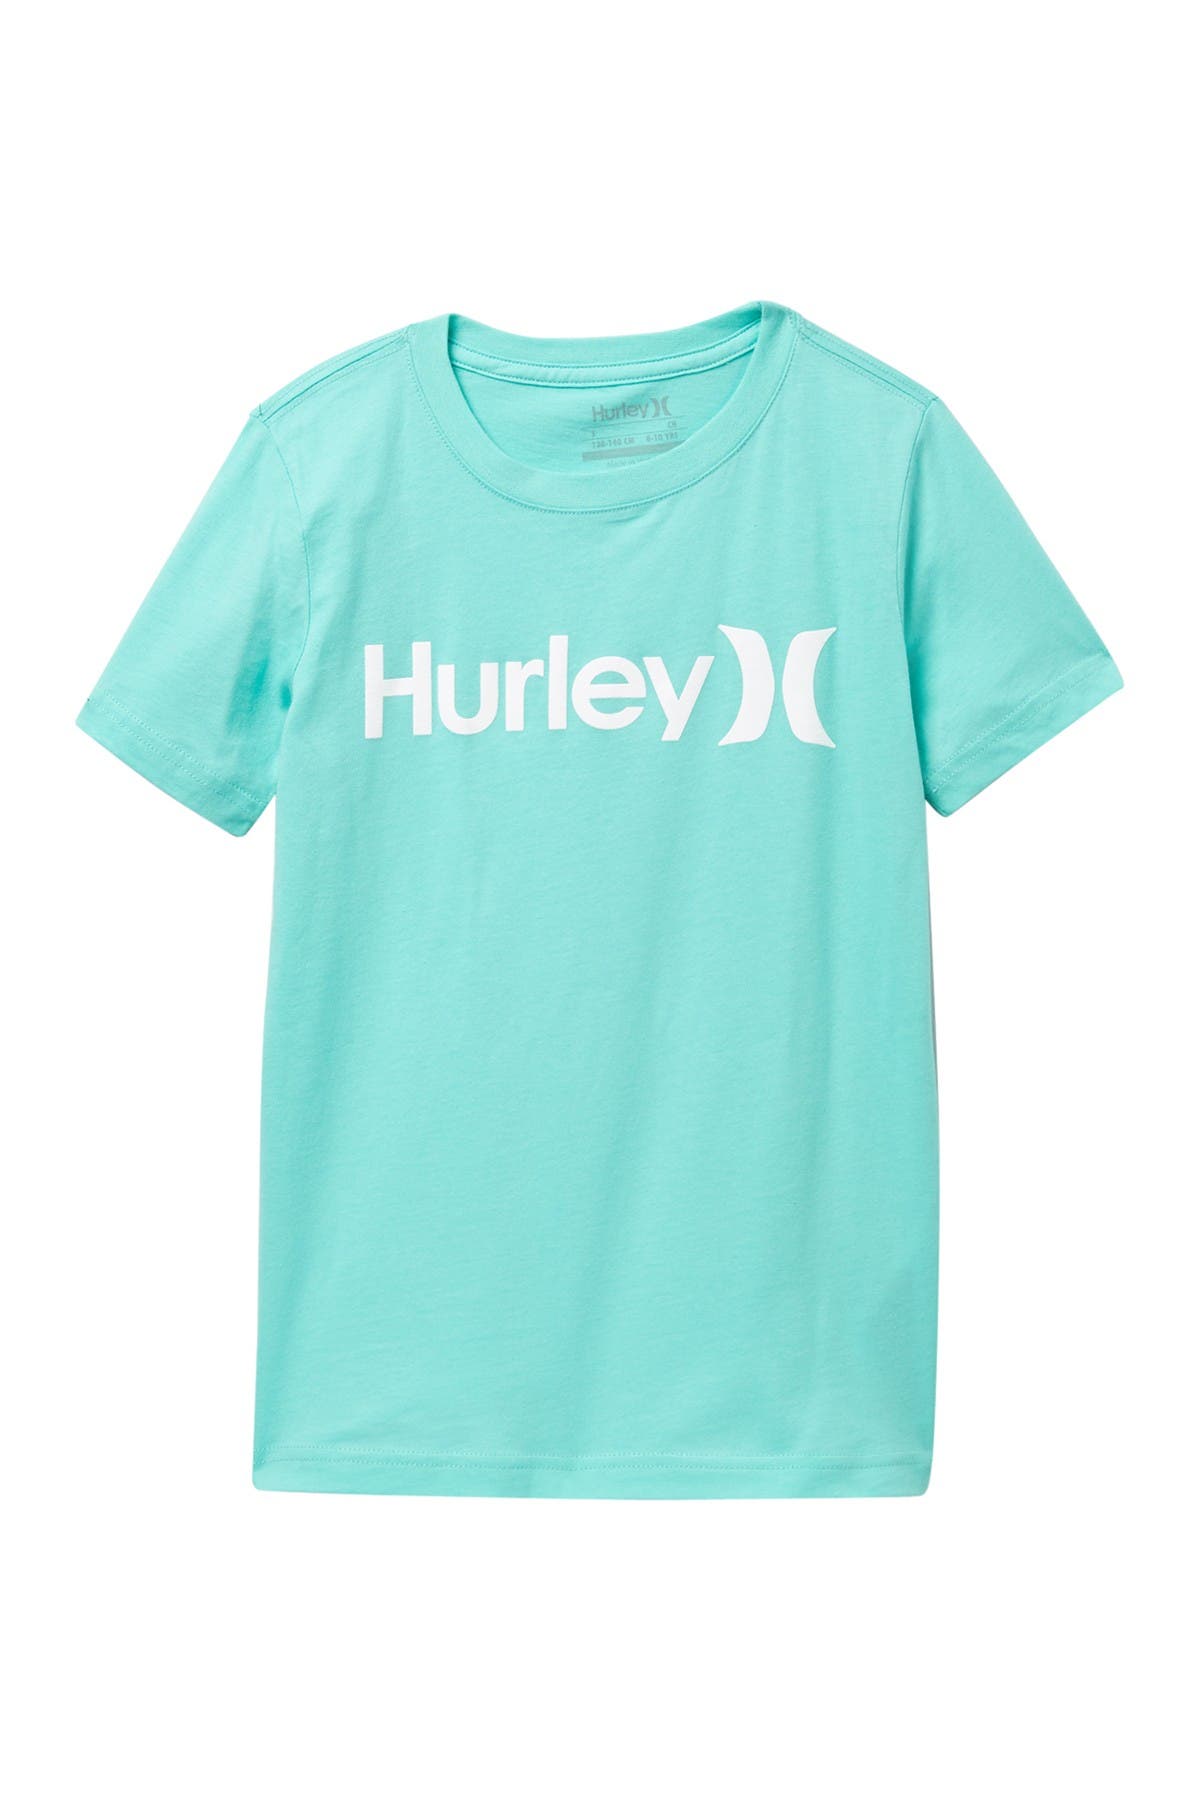 Hurley Kids' One & Only Graphic T-shirt In F1pforest